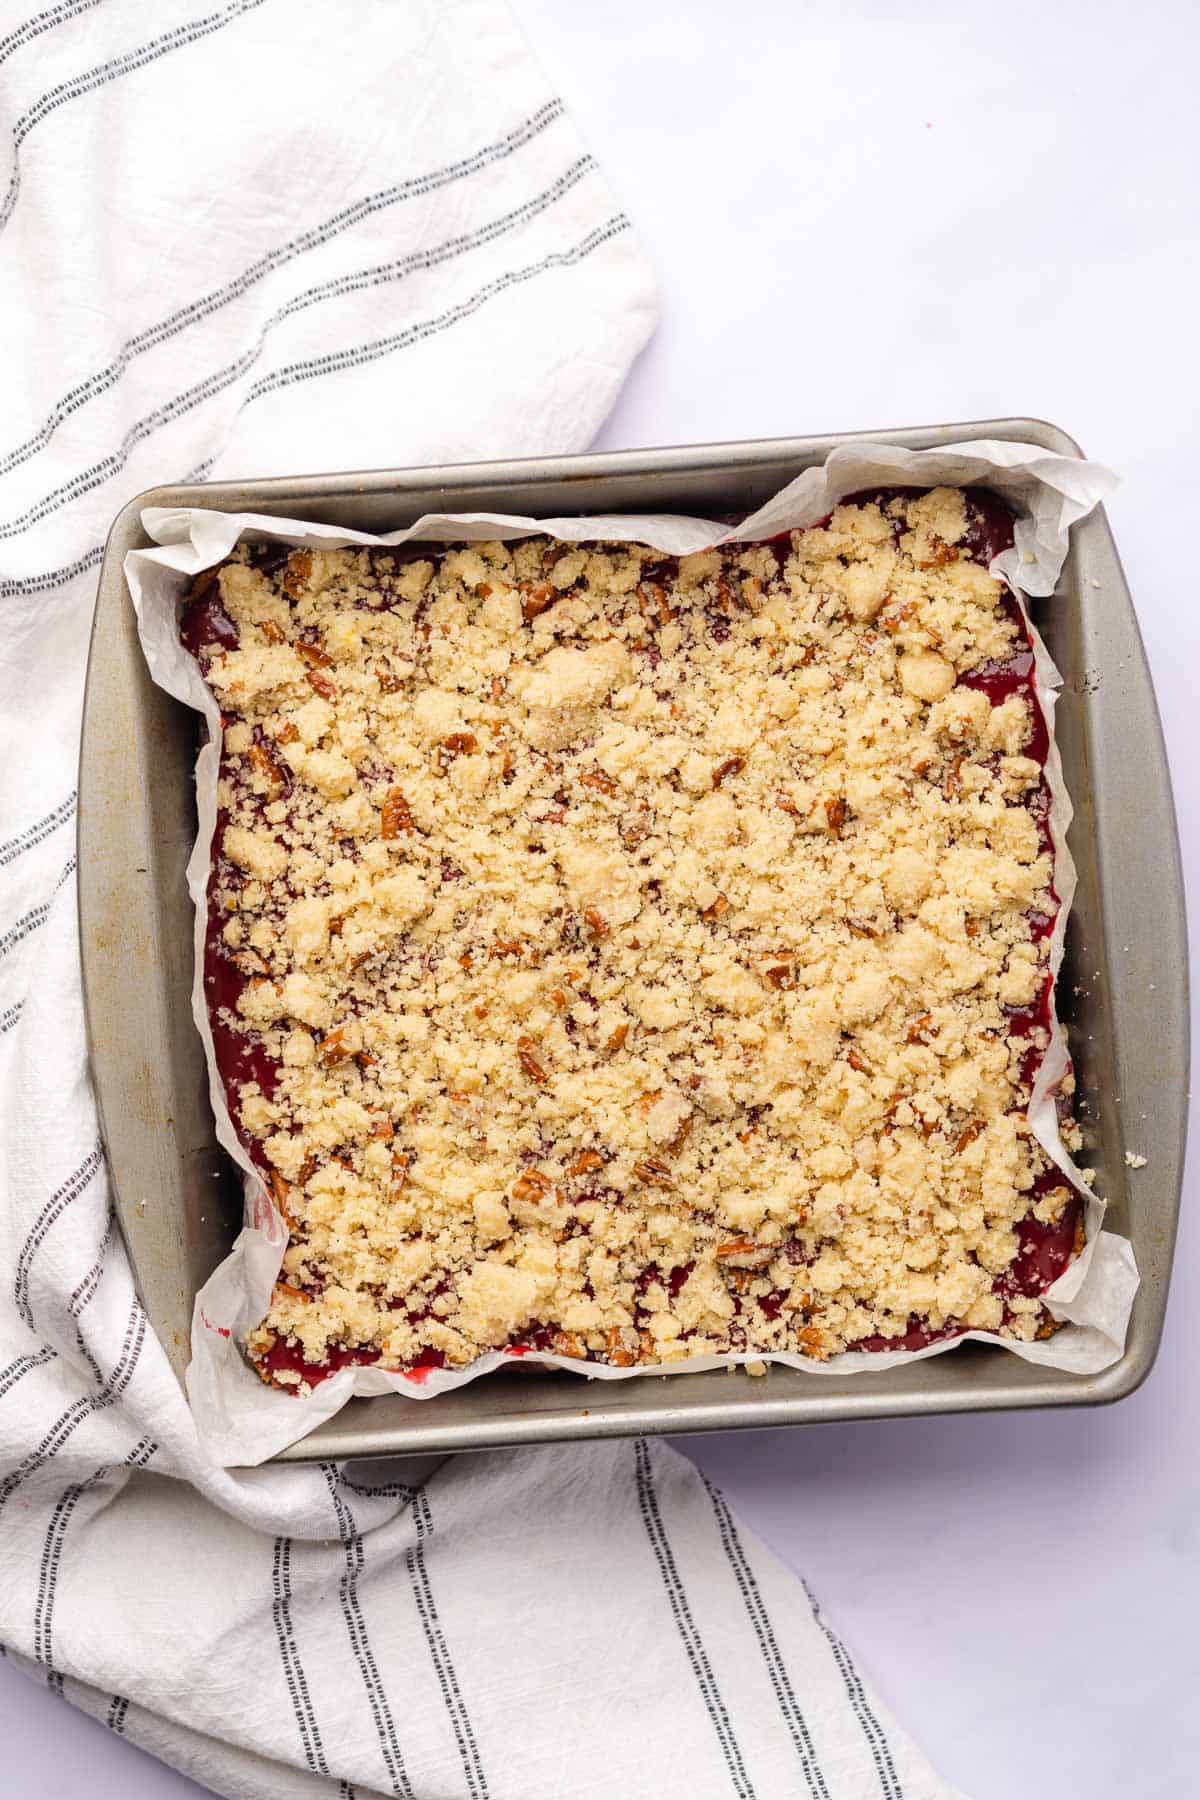 plum bars with pecan crumble topping raw in a 9x9 baking pan with white parchment